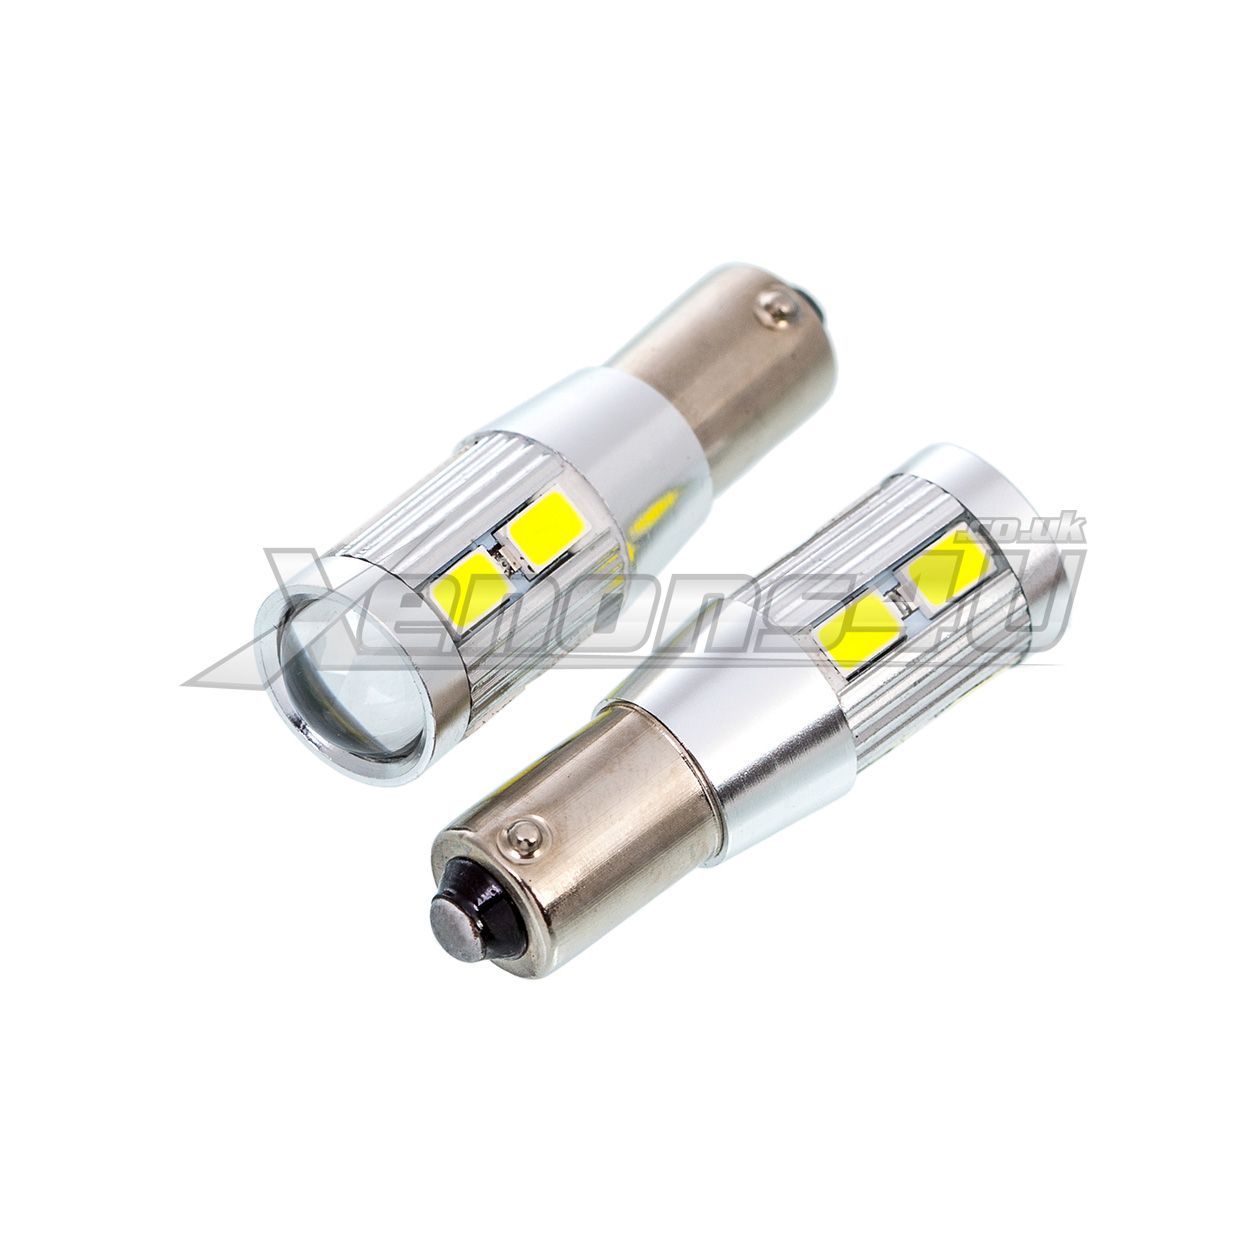 Lampe VISION H6W BAX9s 12V 3x 5050 SMD LED, CANBUS, blanc, 1 pc.